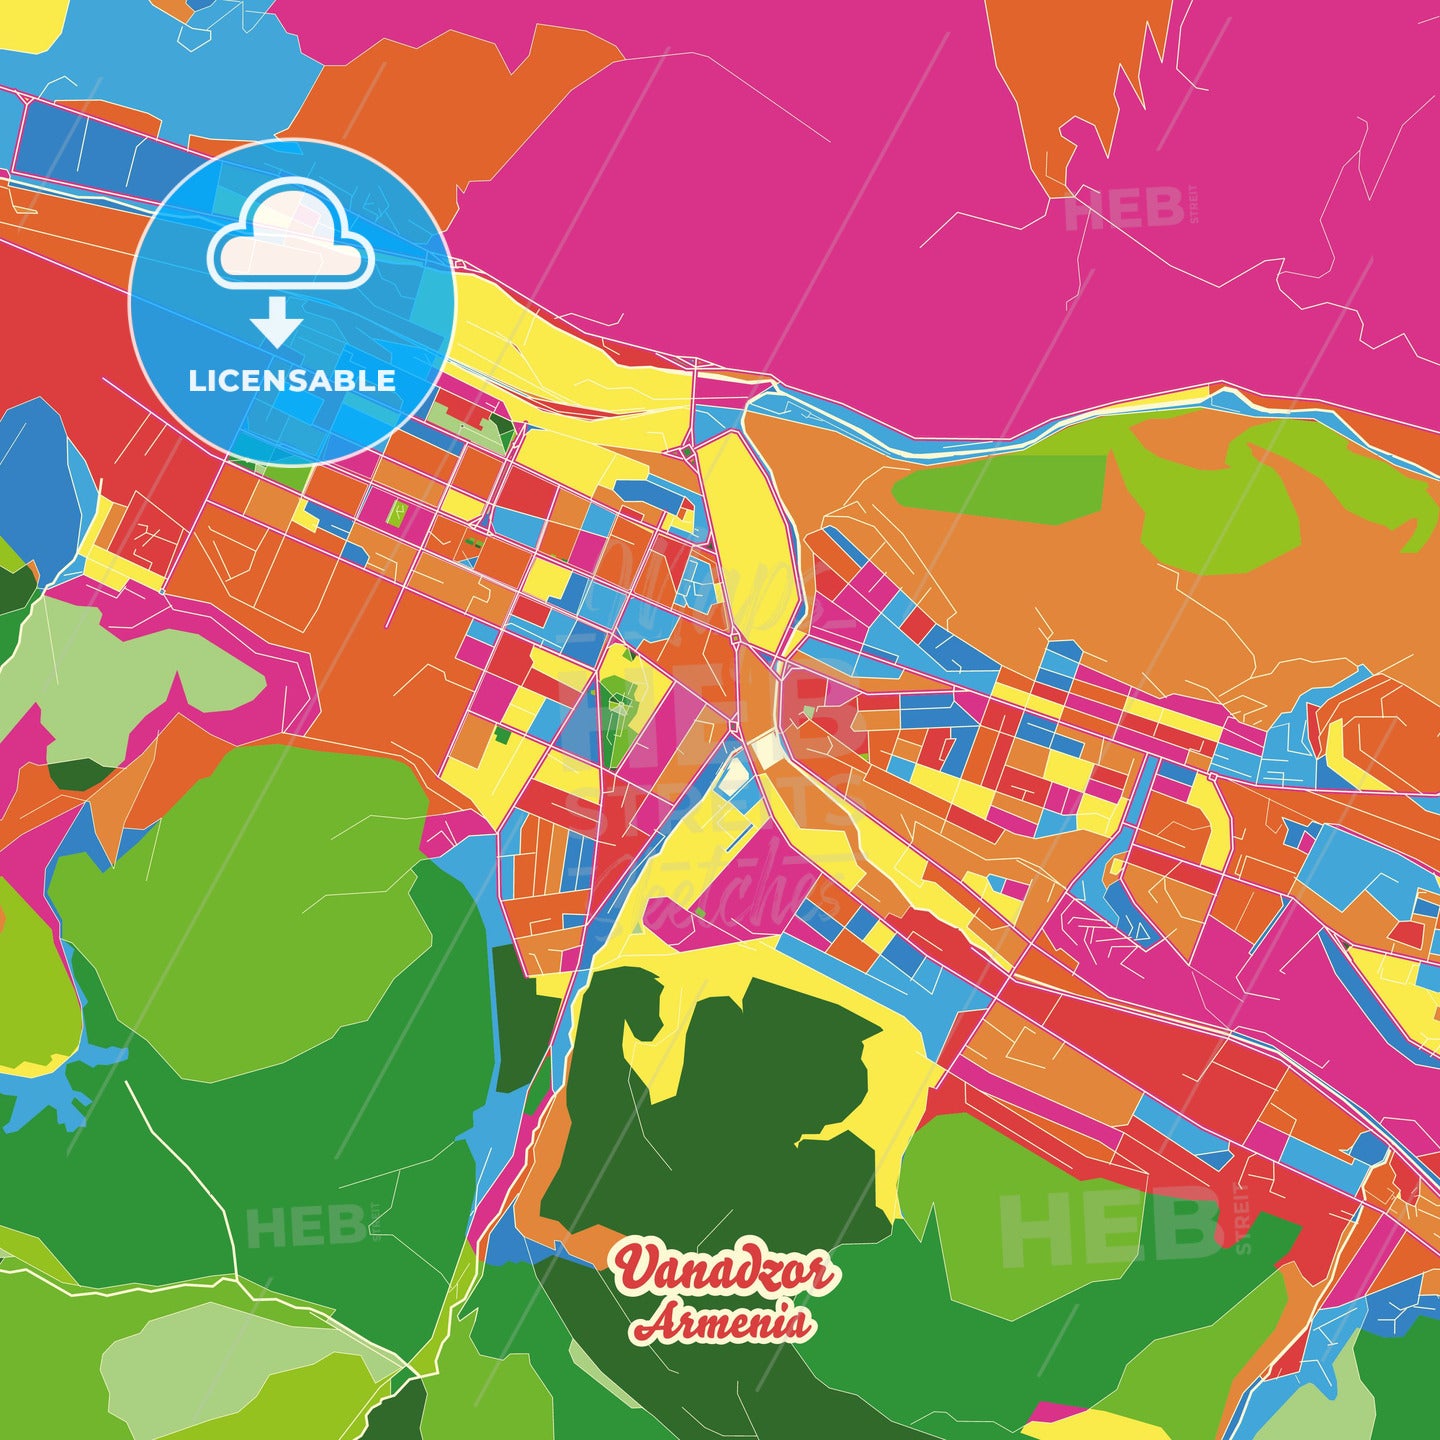 Vanadzor, Armenia Crazy Colorful Street Map Poster Template - HEBSTREITS Sketches